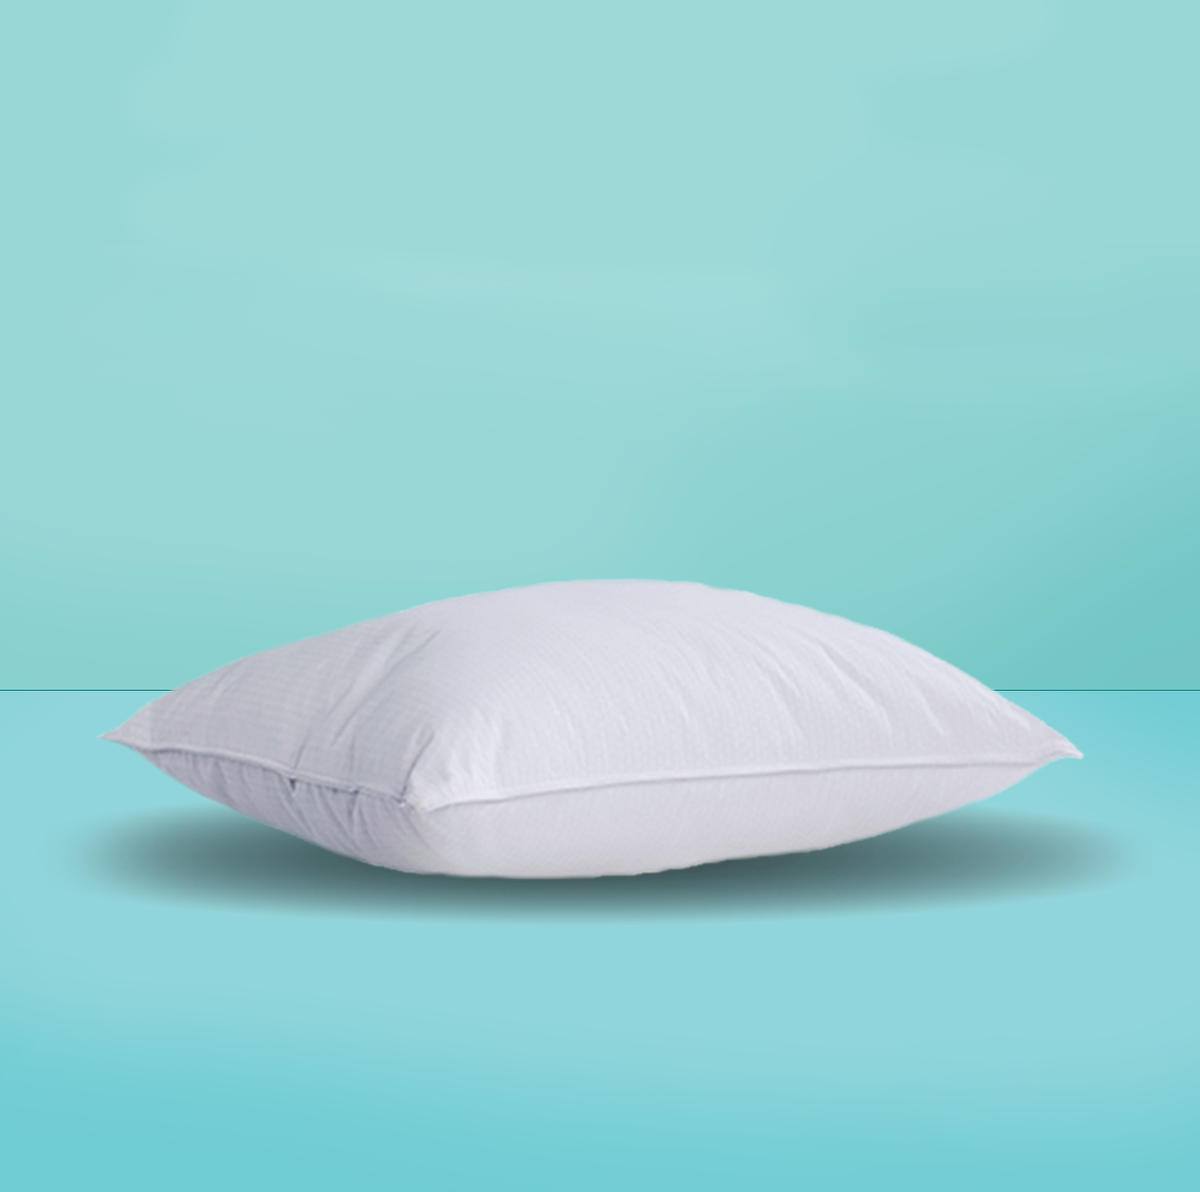 A 2-in-1 pillow that lets you sleep on your bed or at your desk